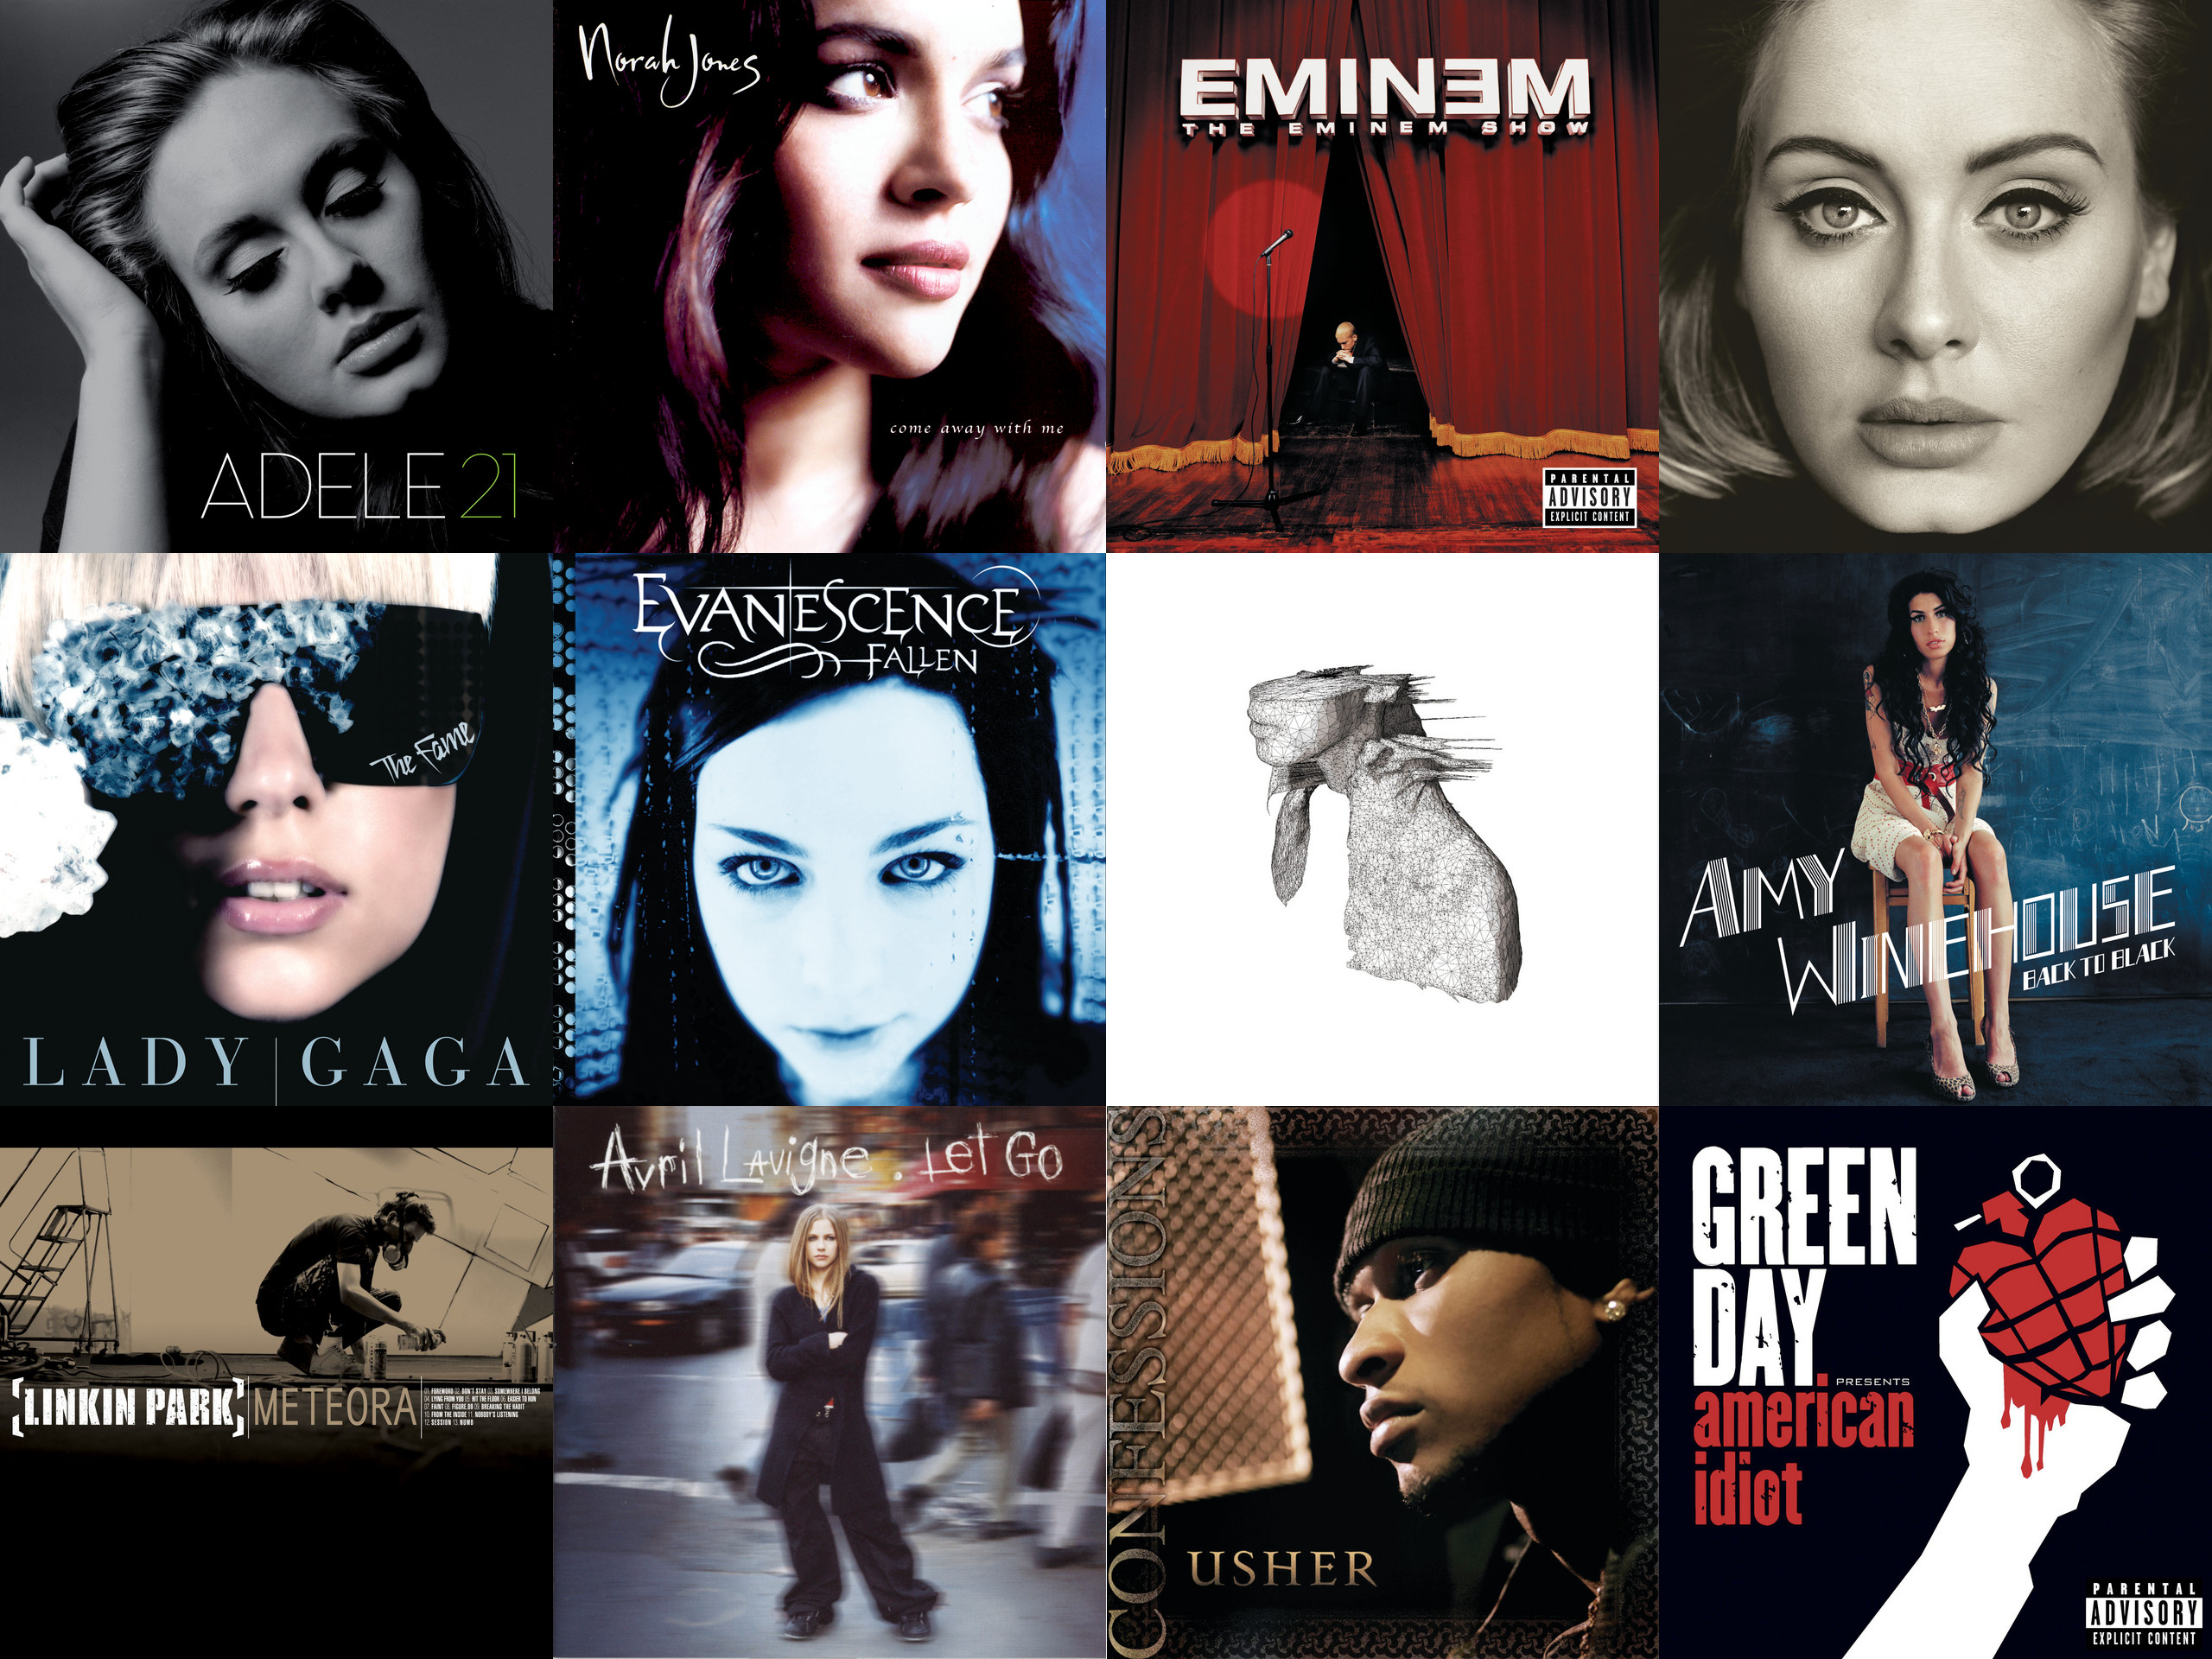 Top 12 best-selling albums of the 21st century